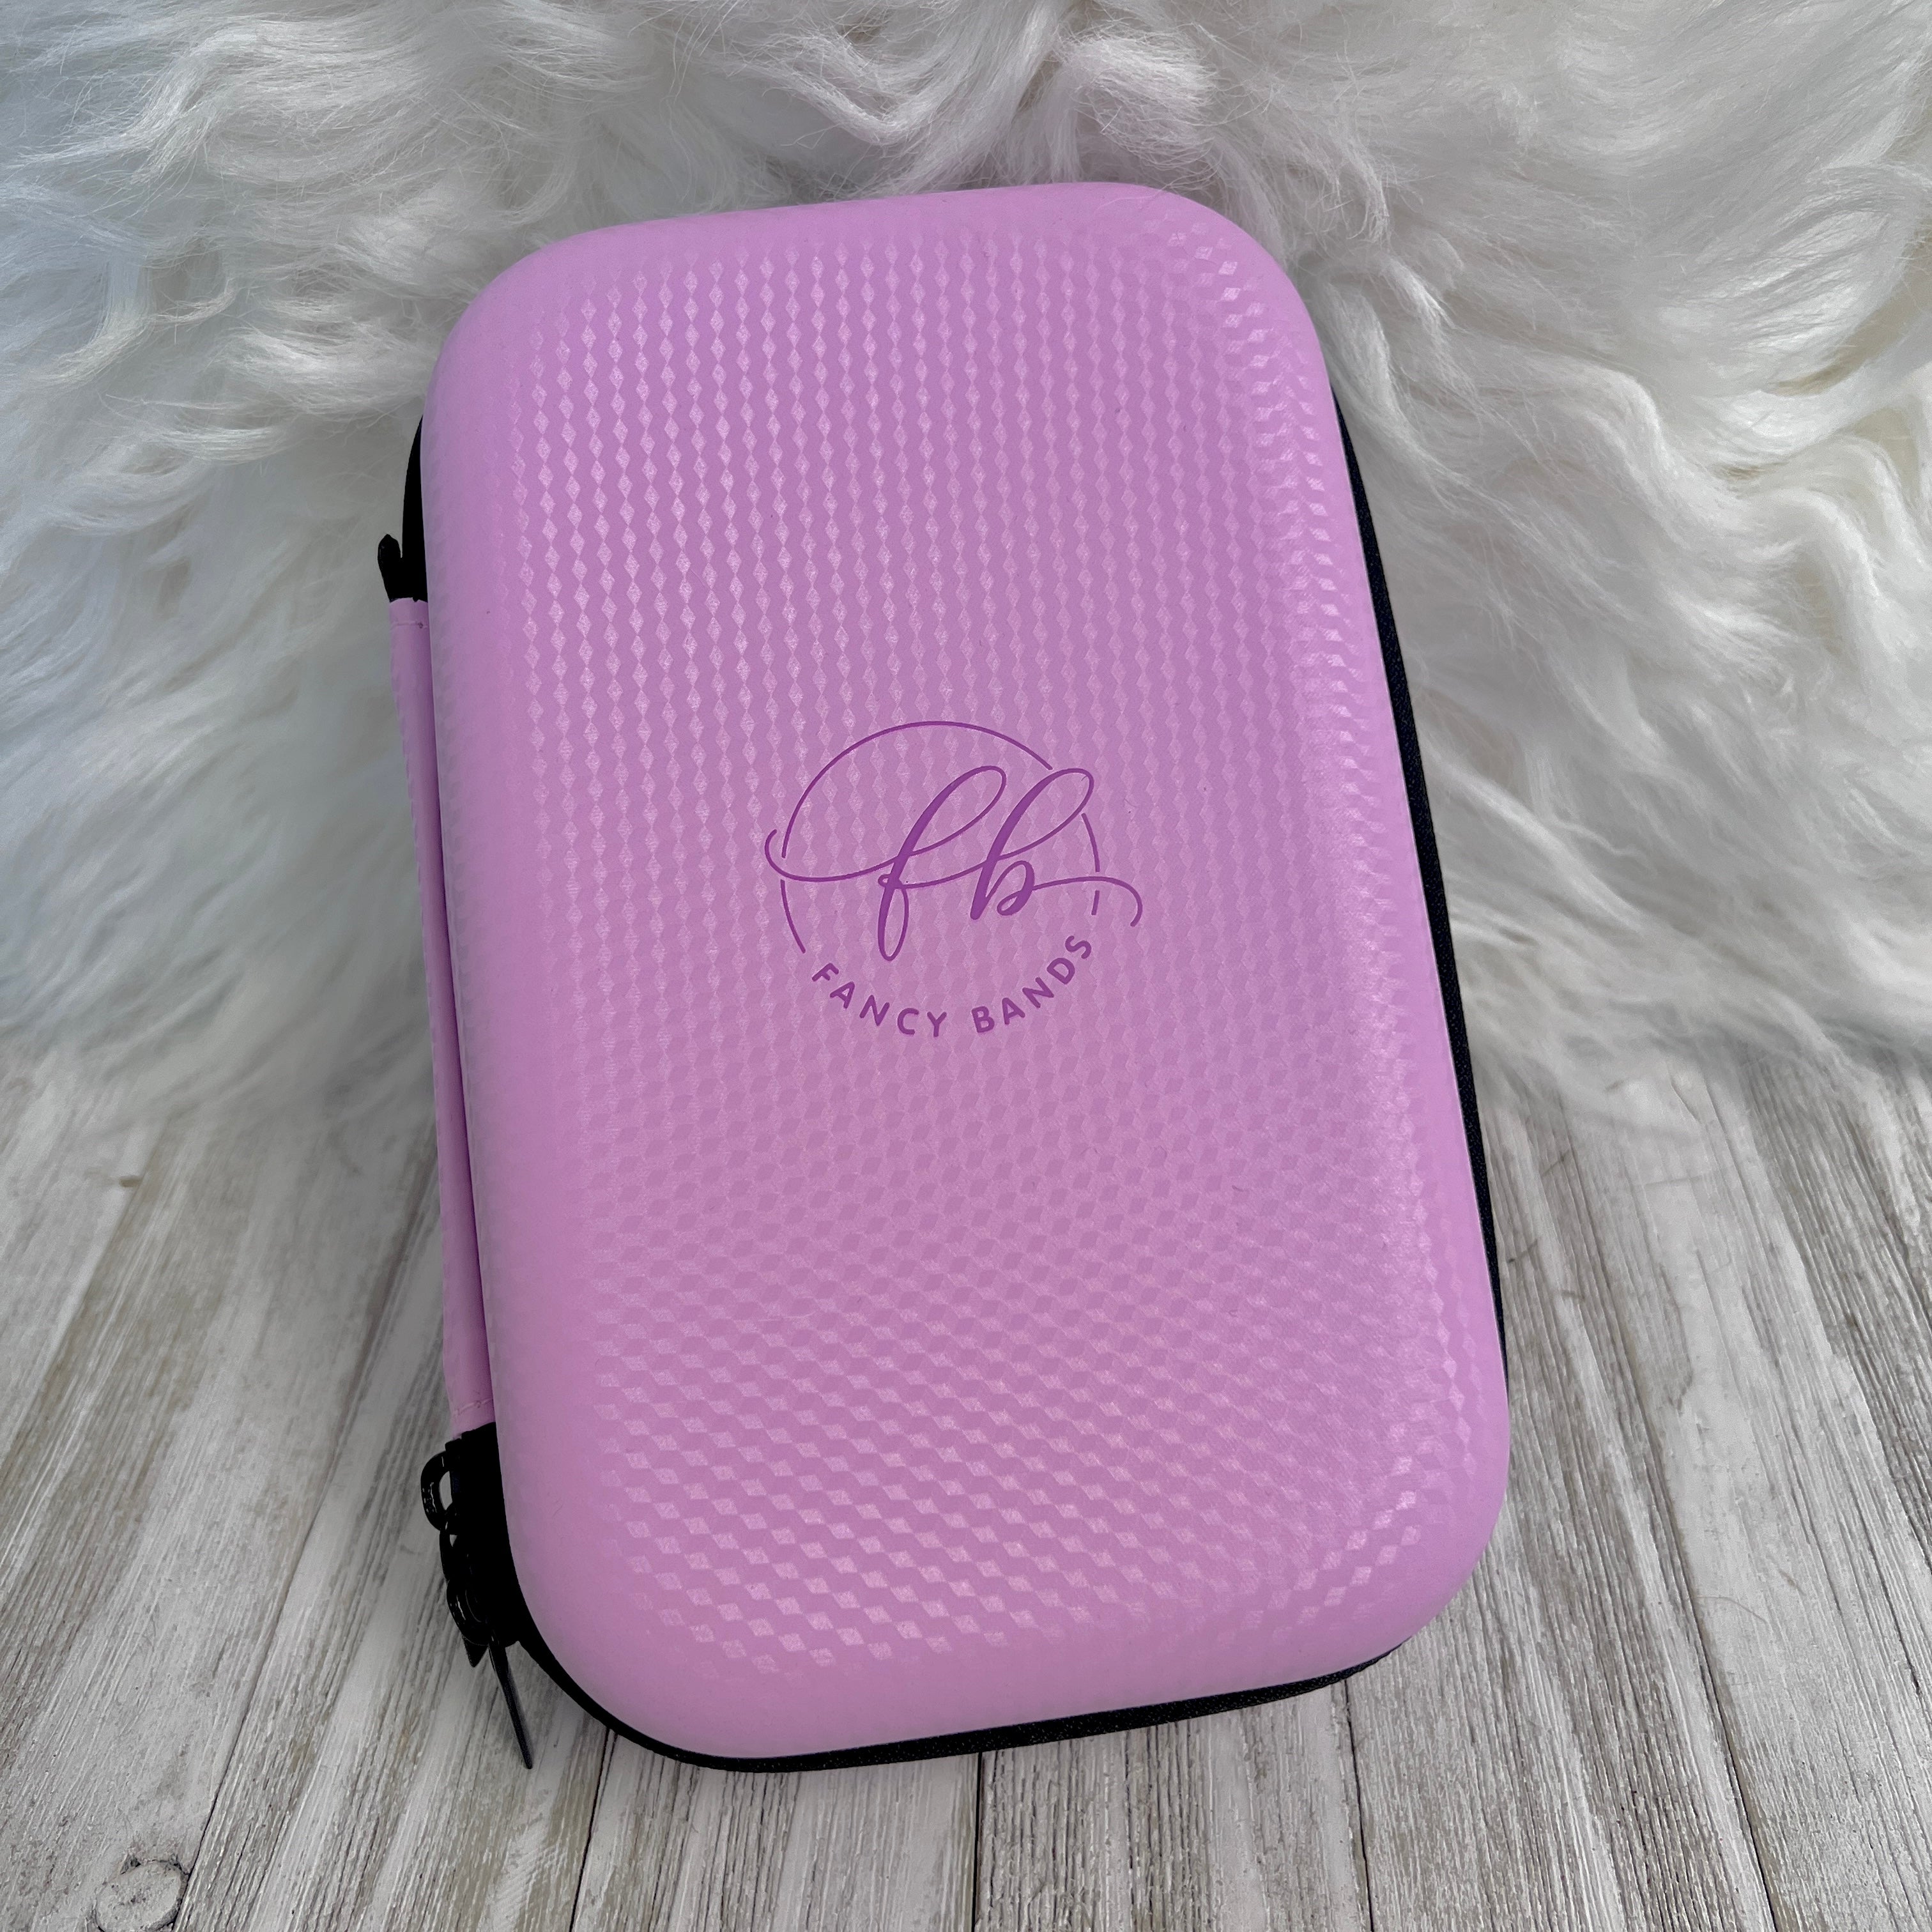 Travel Size Fancy Band Storage Case Two Colors Available